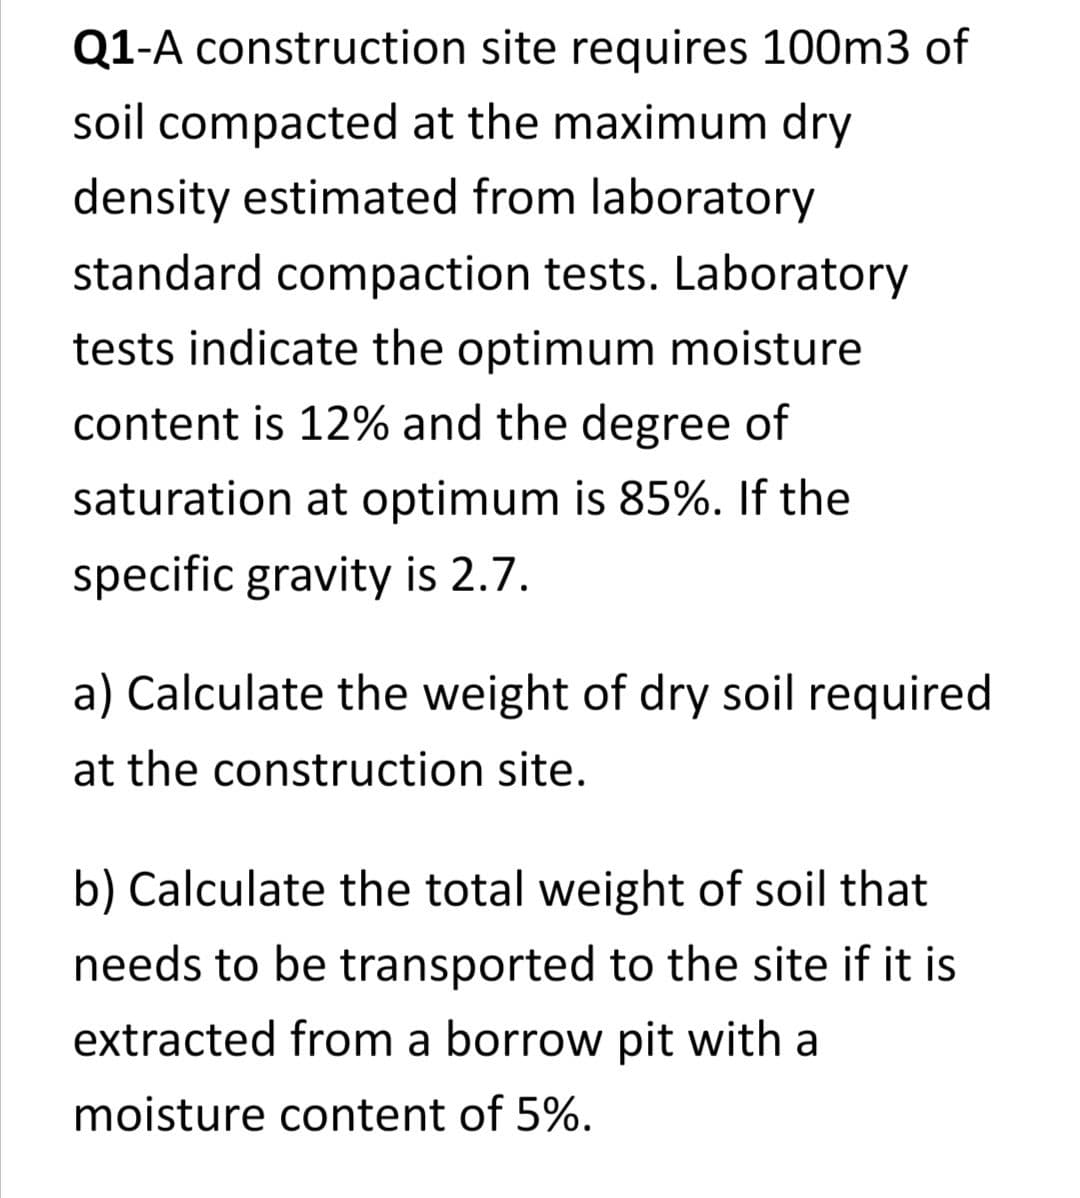 Q1-A construction site requires 100m3 of
soil compacted at the maximum dry
density estimated from laboratory
standard compaction tests. Laboratory
tests indicate the optimum moisture
content is 12% and the degree of
saturation at optimum is 85%. If the
specific gravity is 2.7.
a) Calculate the weight of dry soil required
at the construction site.
b) Calculate the total weight of soil that
needs to be transported to the site if it is
extracted from a borrow pit with a
moisture content of 5%.